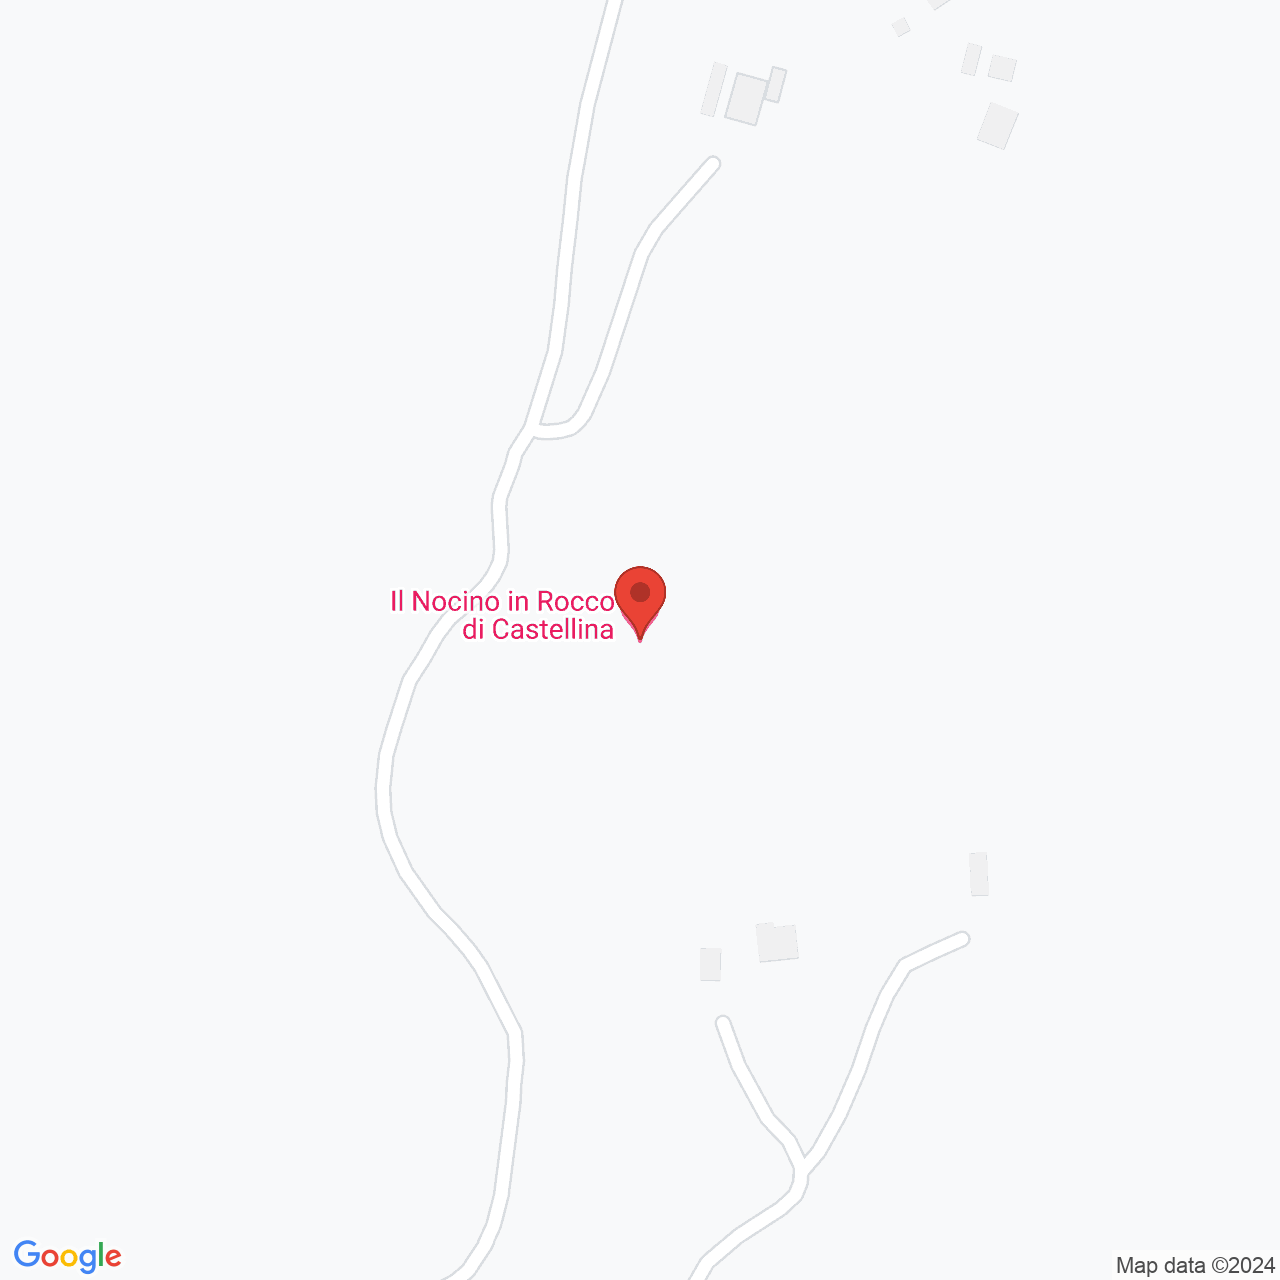 https://maps.googleapis.com/maps/api/staticmap?zoom=10&maptype=hybrid&scale=4&center=43.4811742,11.2750531&markers=color:red%7C%7C43.4811742,11.2750531&size=1000x1000&key=AIzaSyAQg6Liu52-a7wn17F9B-5c4QmJ9kTO3Mo